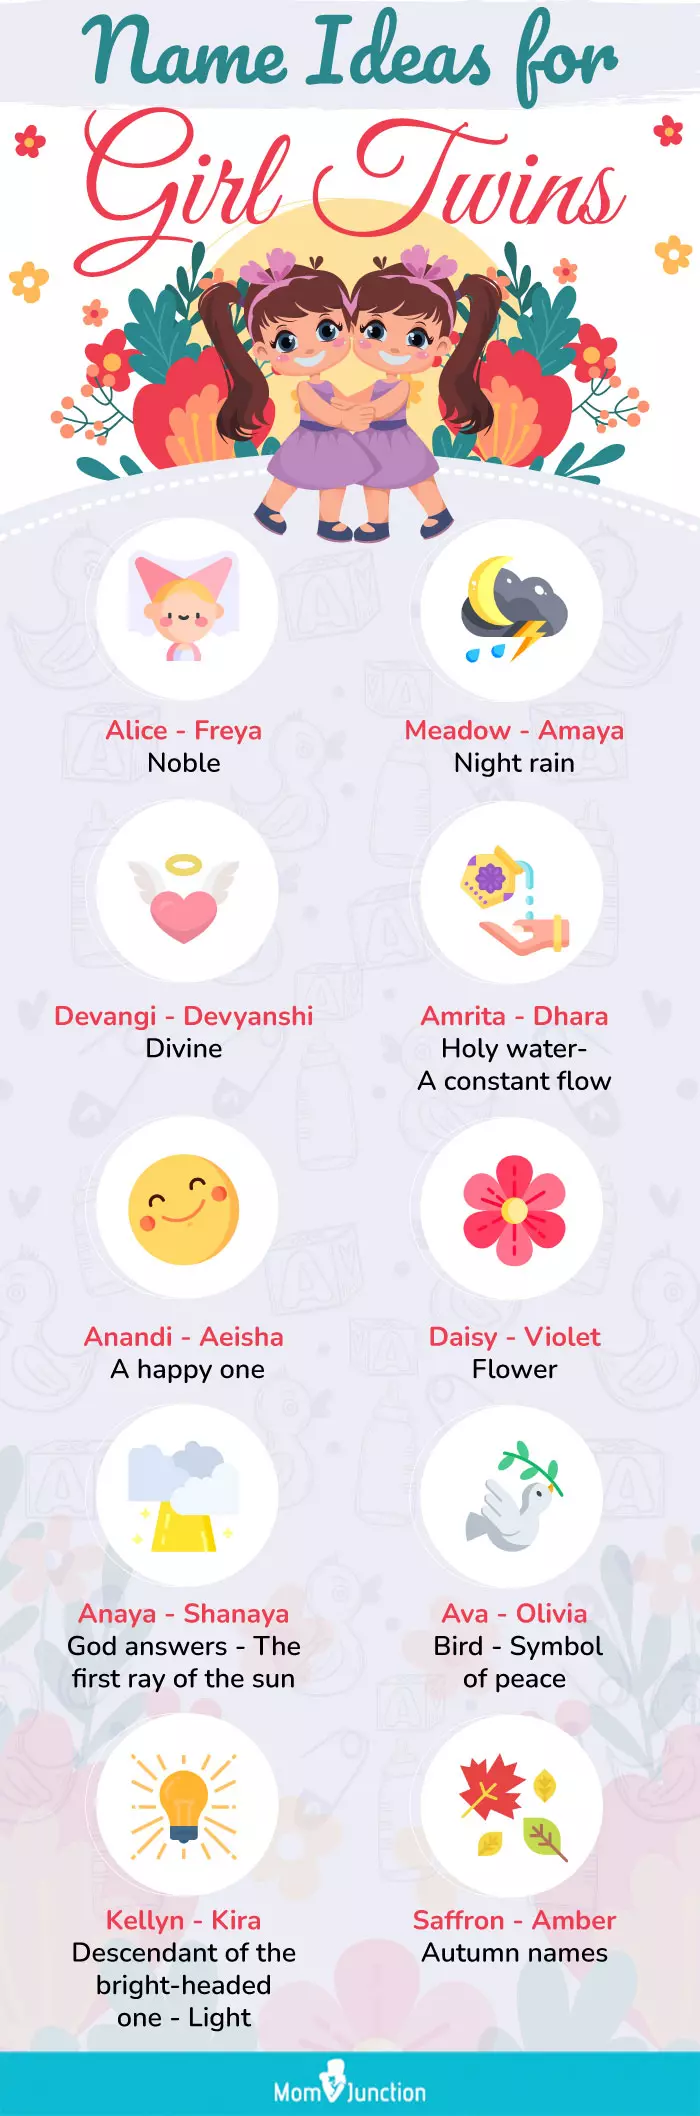 name ideas for girl twins (infographic)